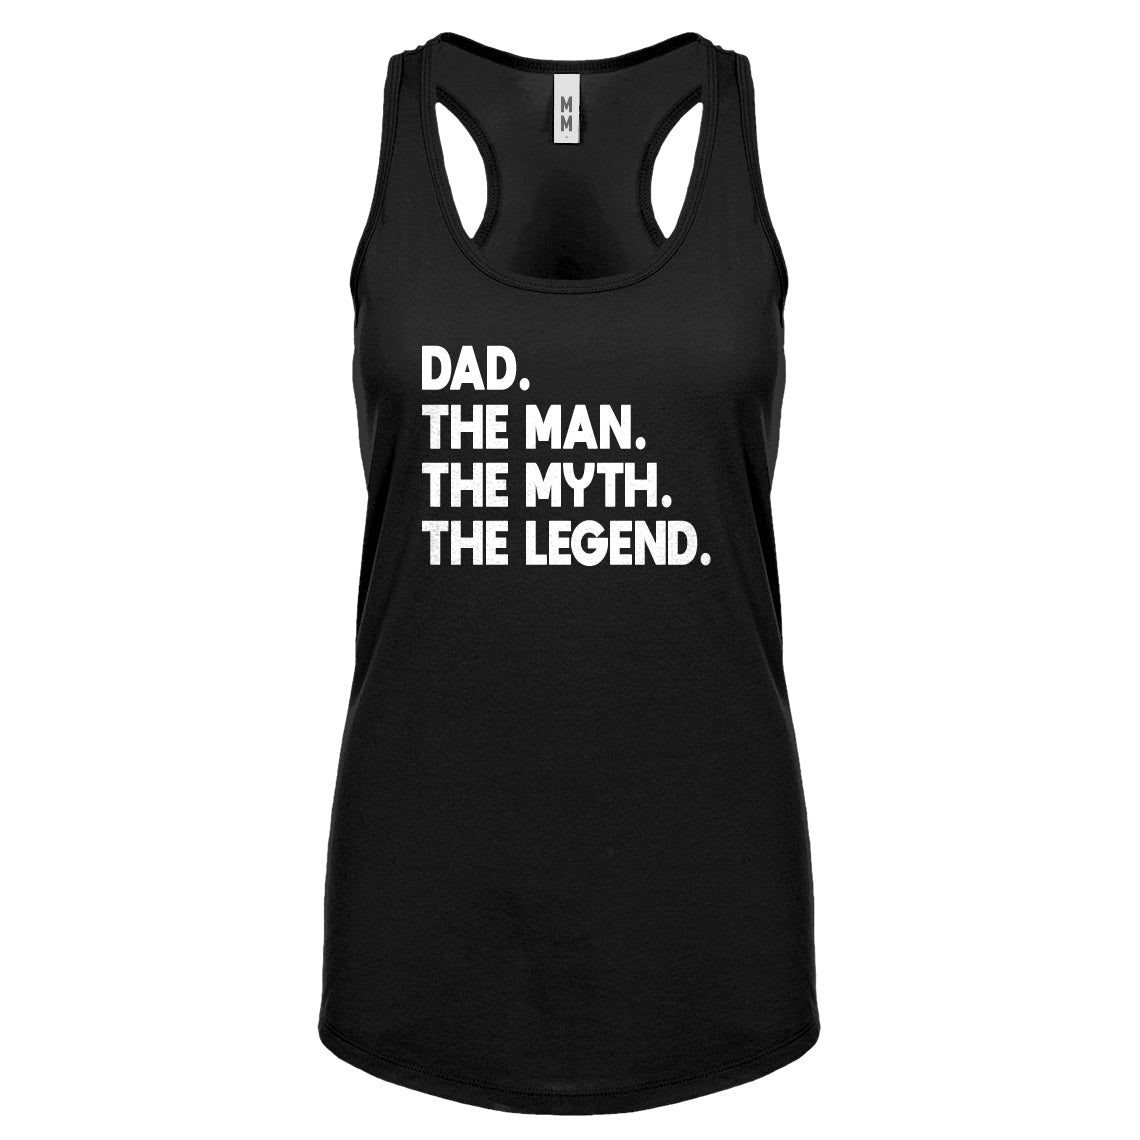 Dad. The Man the Myth the Legend Womens Racerback Tank Top